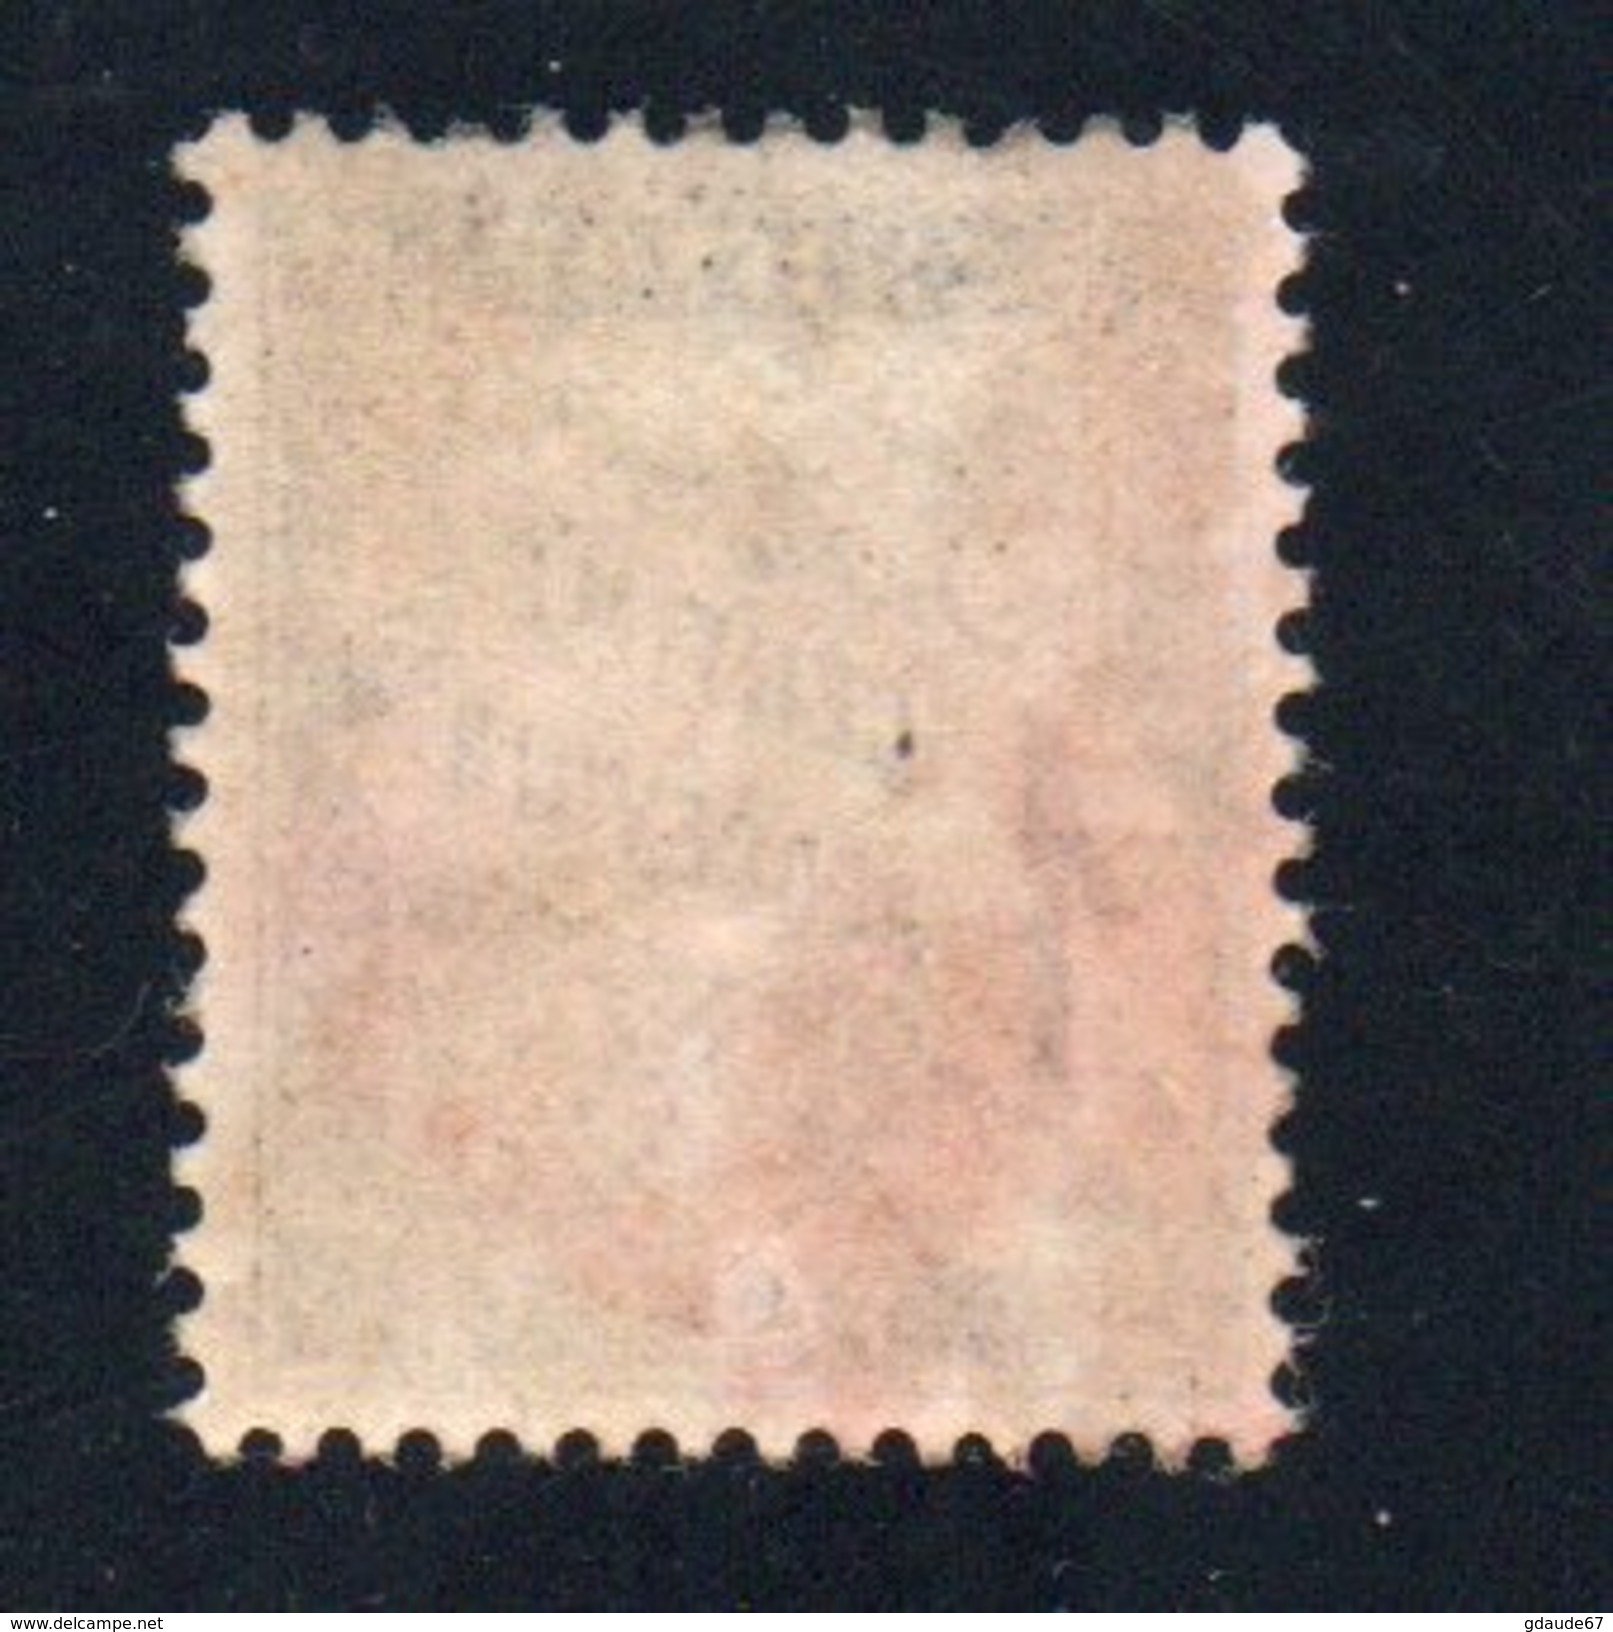 TIMBRE TAXE YVERT N° 10 * - 1859-1959 Mint/hinged